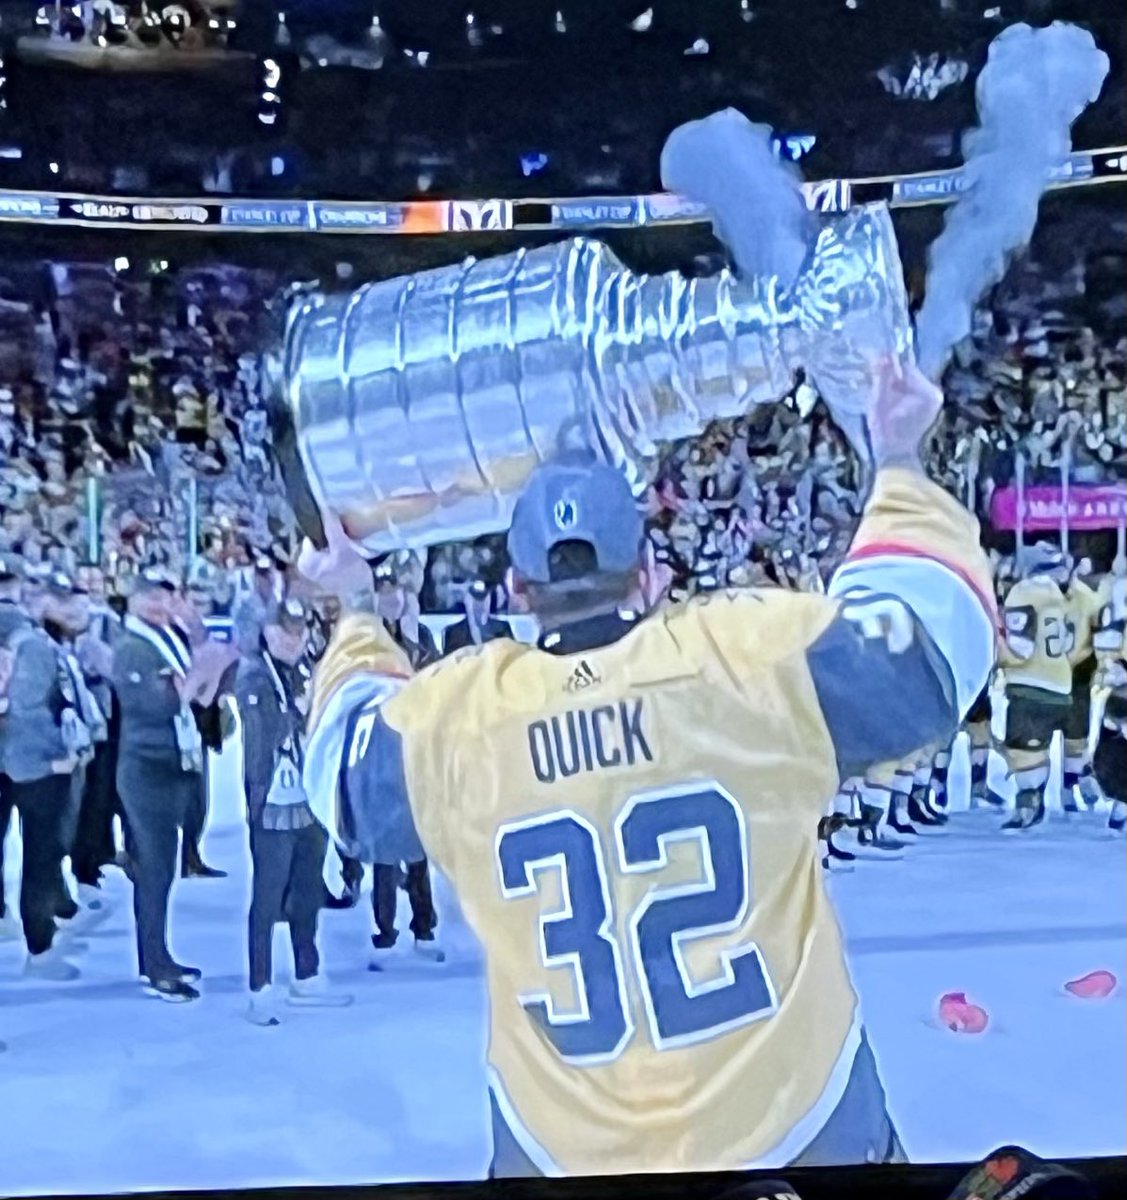 Congratulations Marty and Quickie!! ❤️
3 Stanley Cups 
3rd cup nine years to the day you both won the 2nd cup. 
We miss you guys!! 
#StanleyCup #StanleyCupFinals #VegasBorn #LAKings #NHL